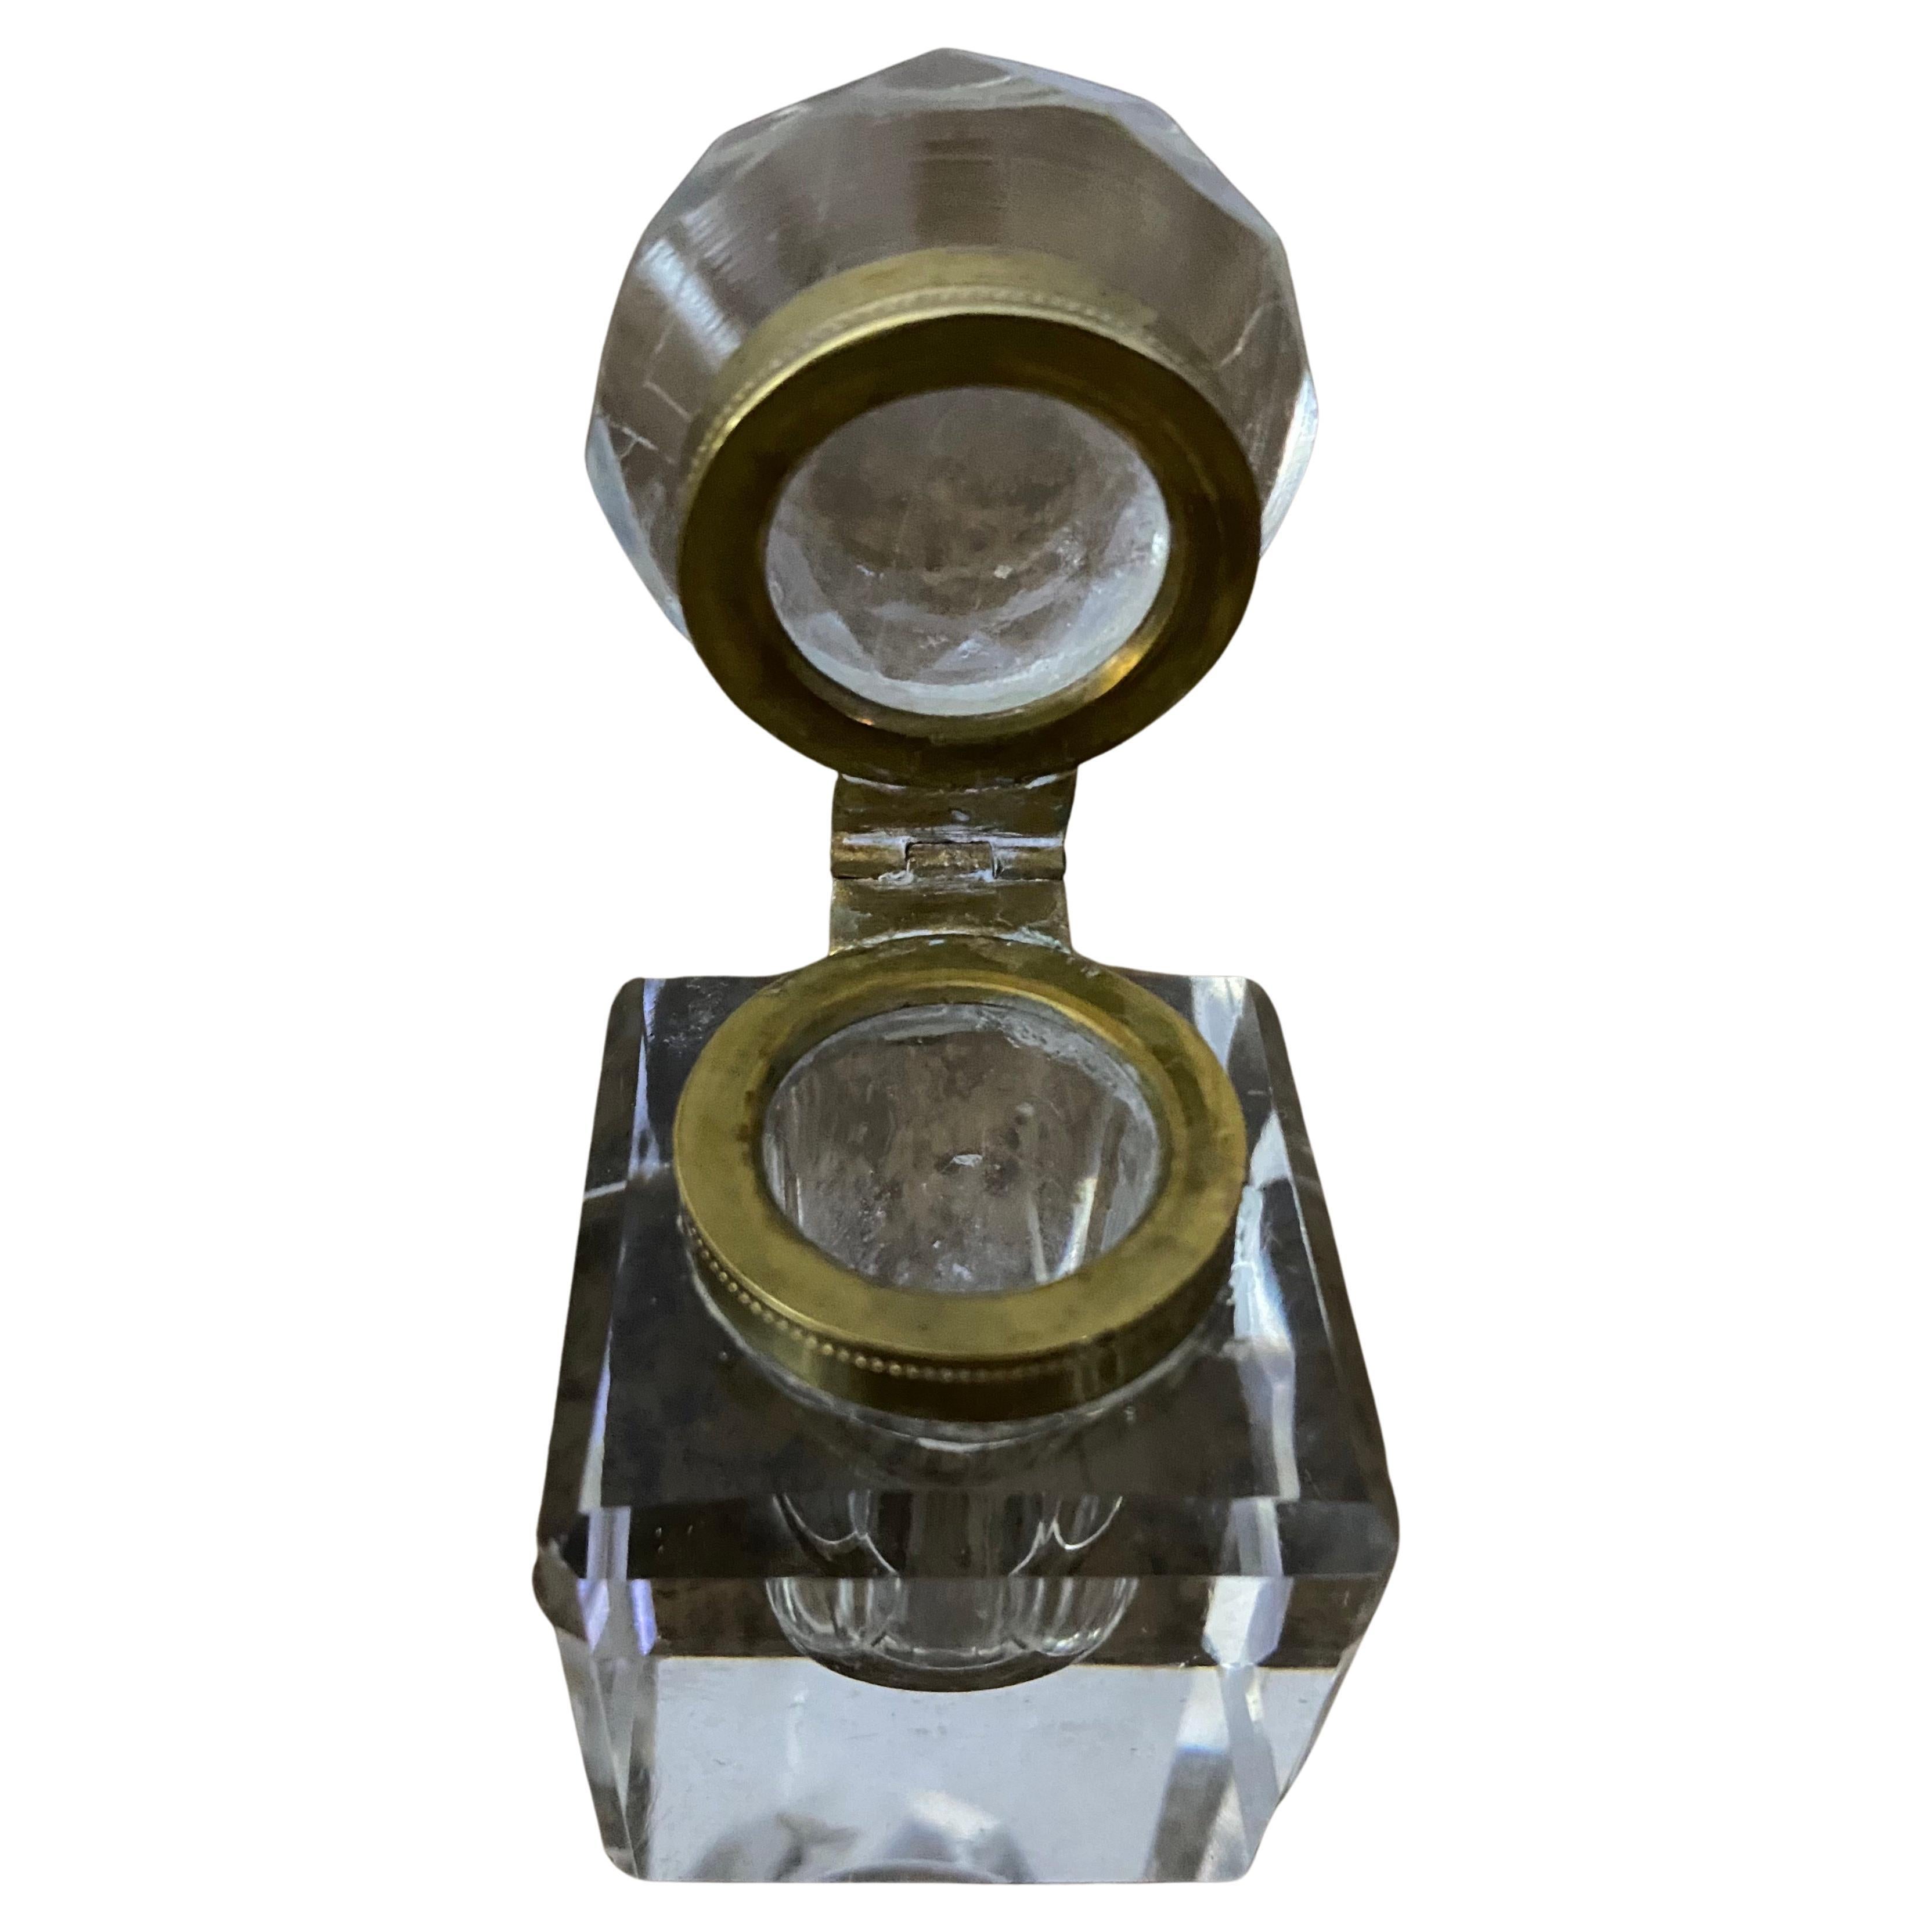 Small and elegant crystal inkwell with a brass collar with a square base and faceted lid makes a wonderful accent on your desk or table top.
Ink-well, ink well, inkwell.